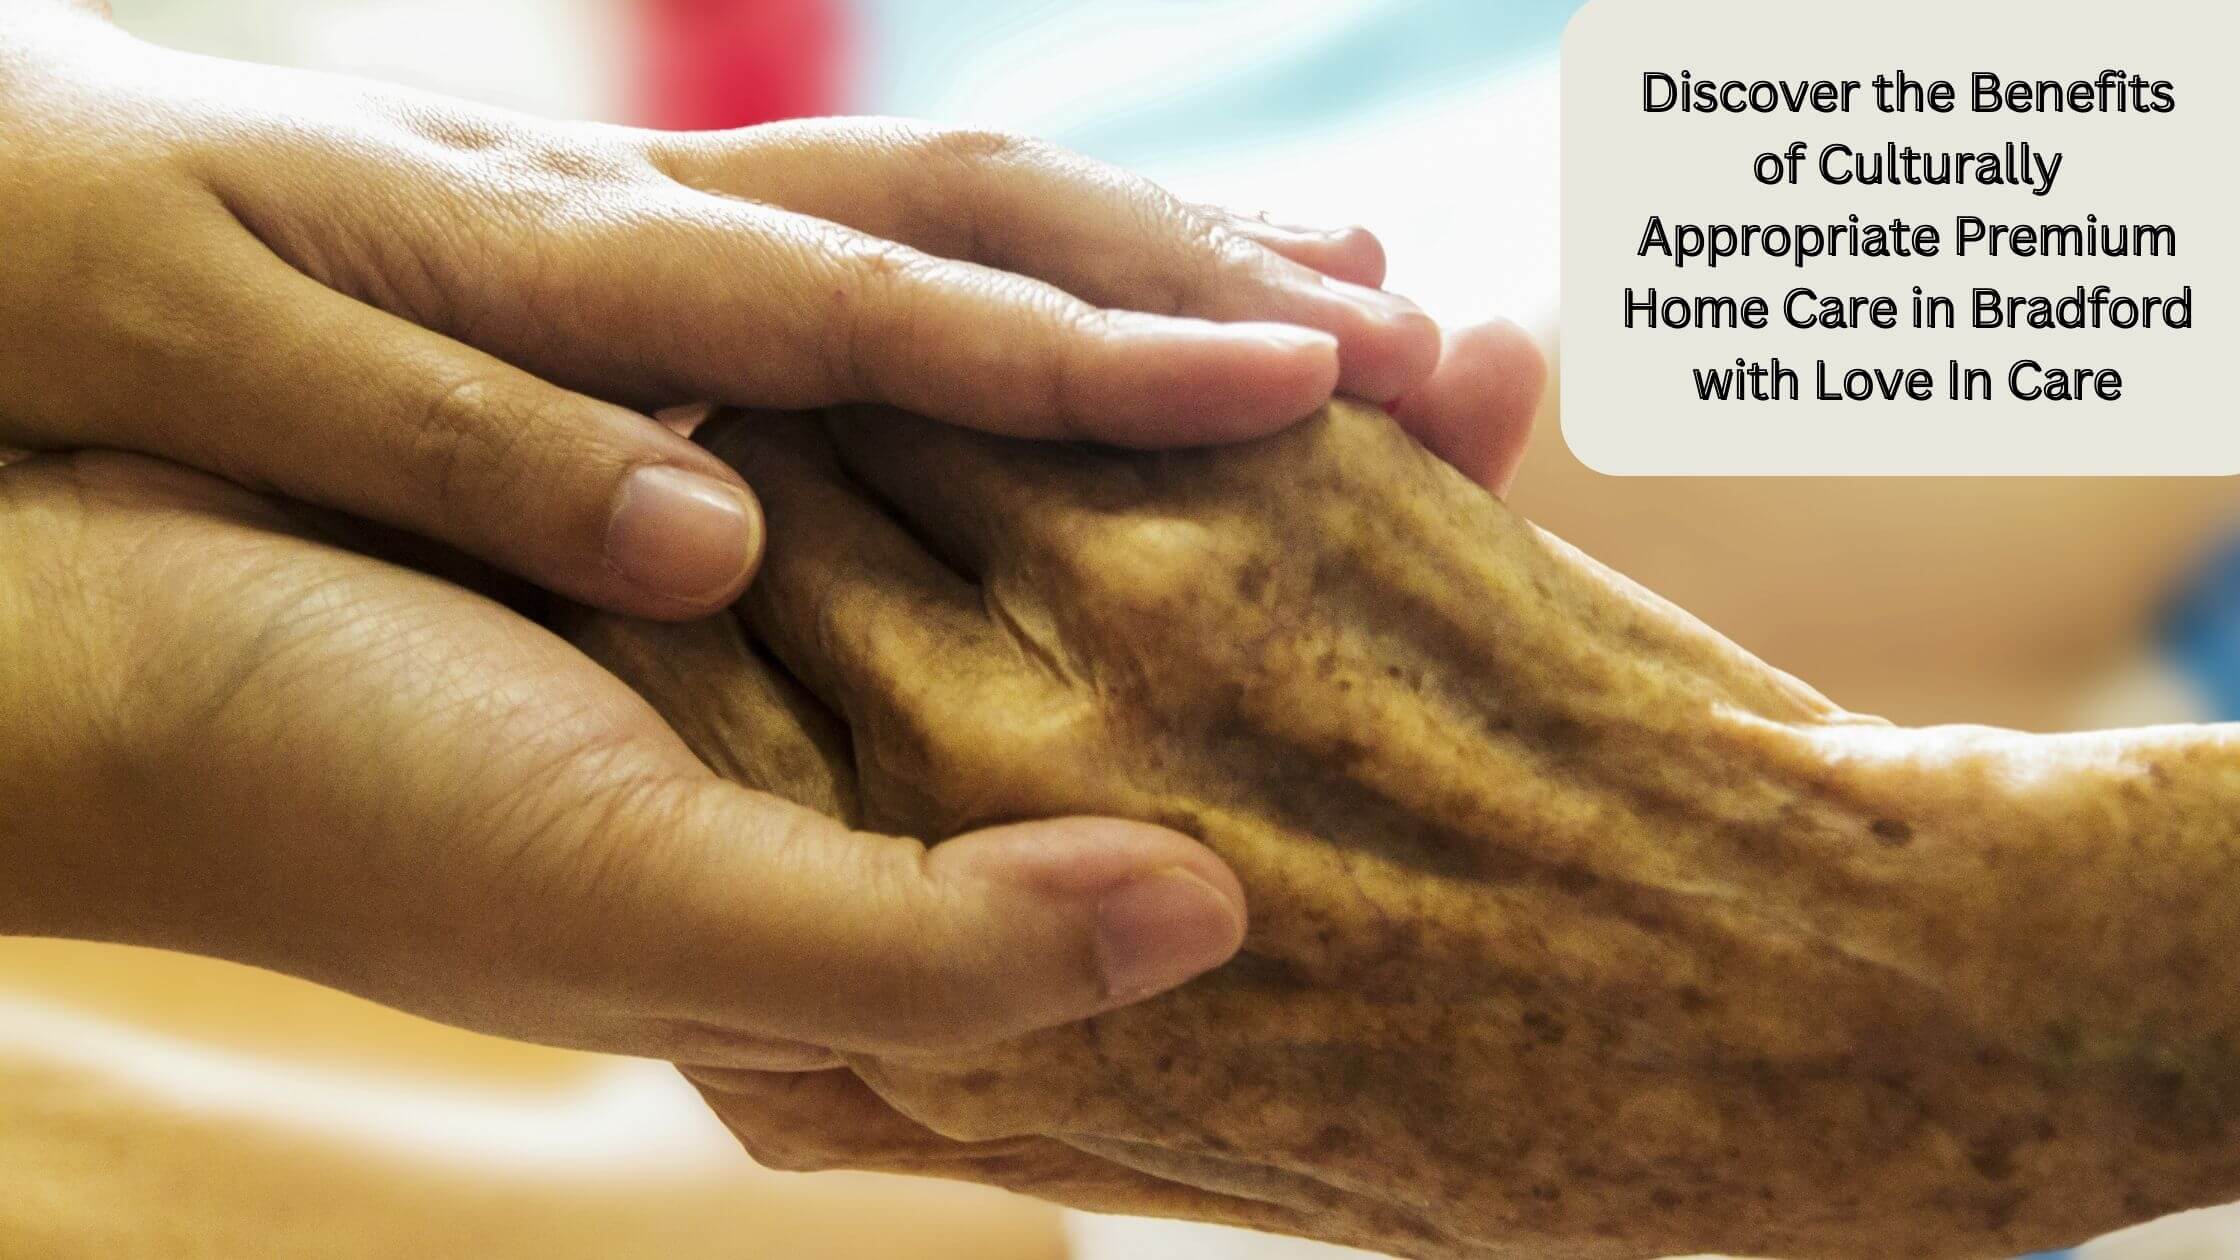 Discover the Benefits of Culturally Appropriate Premium Home Care in Bradford with Love In Care